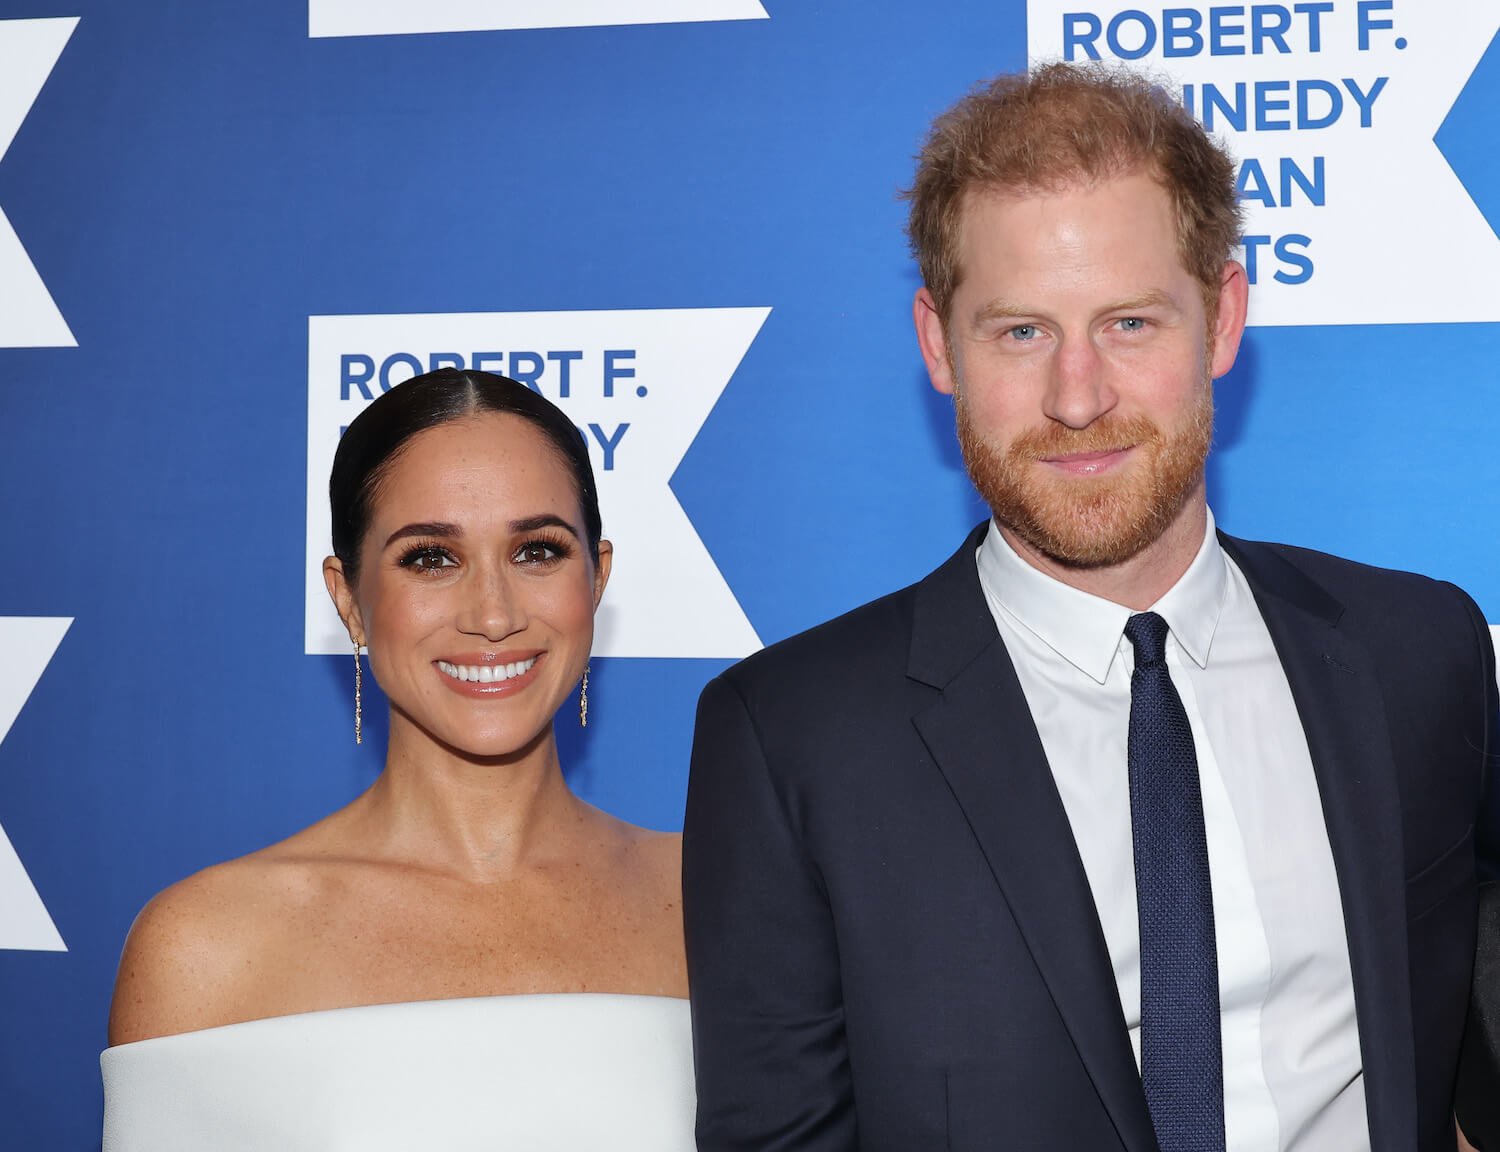 Prince Harry and Meghan Markle pose on a red carpet.